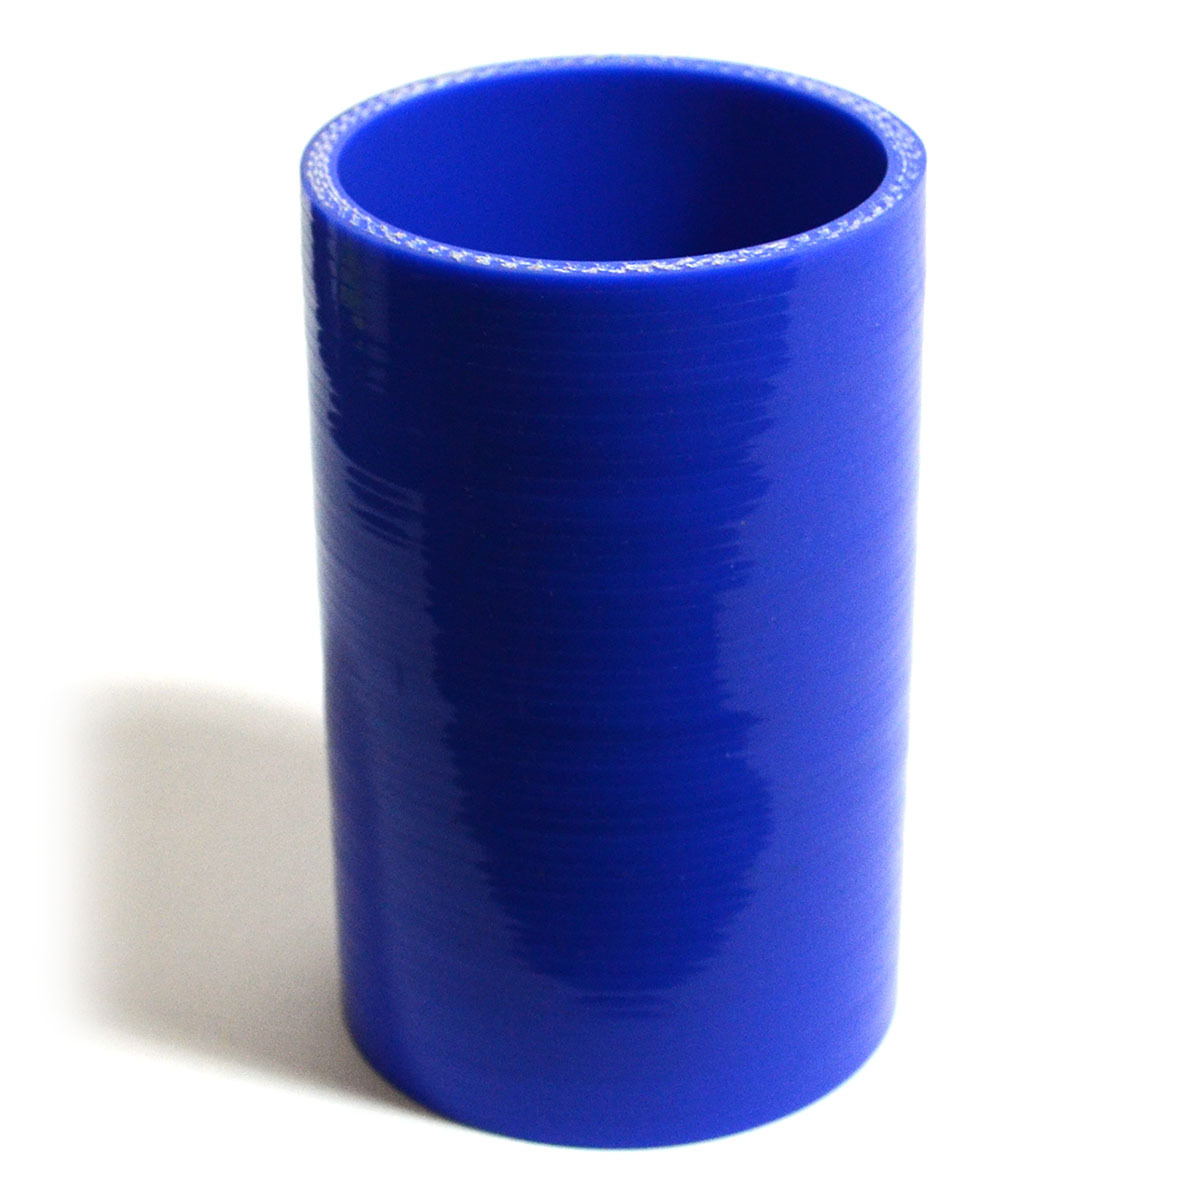 Straight 4 Ply Silicone Hose 76mm x 76mm x 127mm Blue